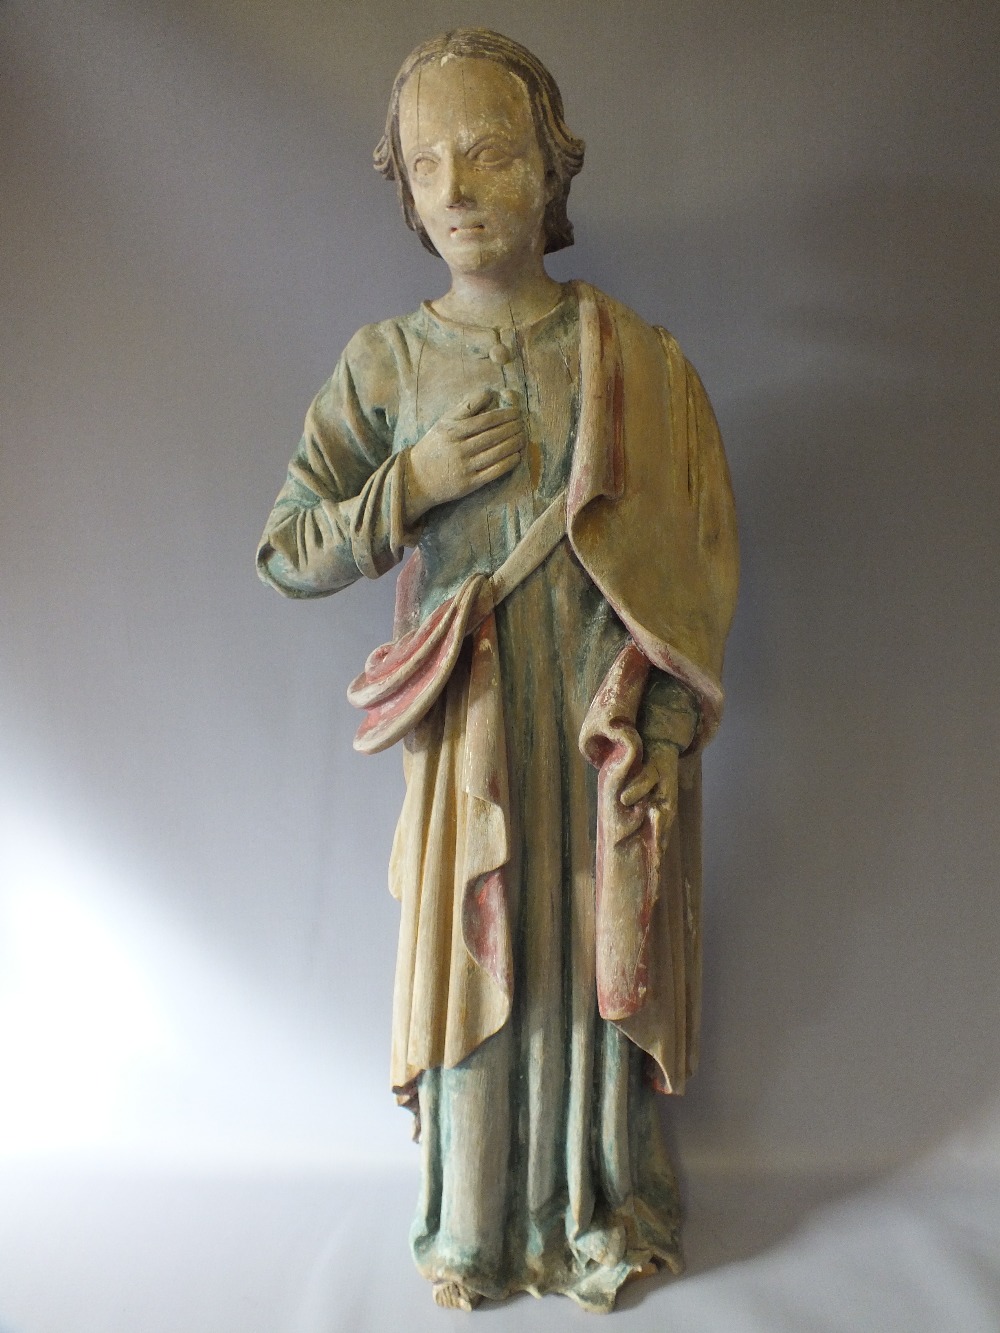 A LARGE EARLY CARVED WOOD RELIGIOUS STATUE DEPICTING A SAINT, with coloured decoration, H 85 cm